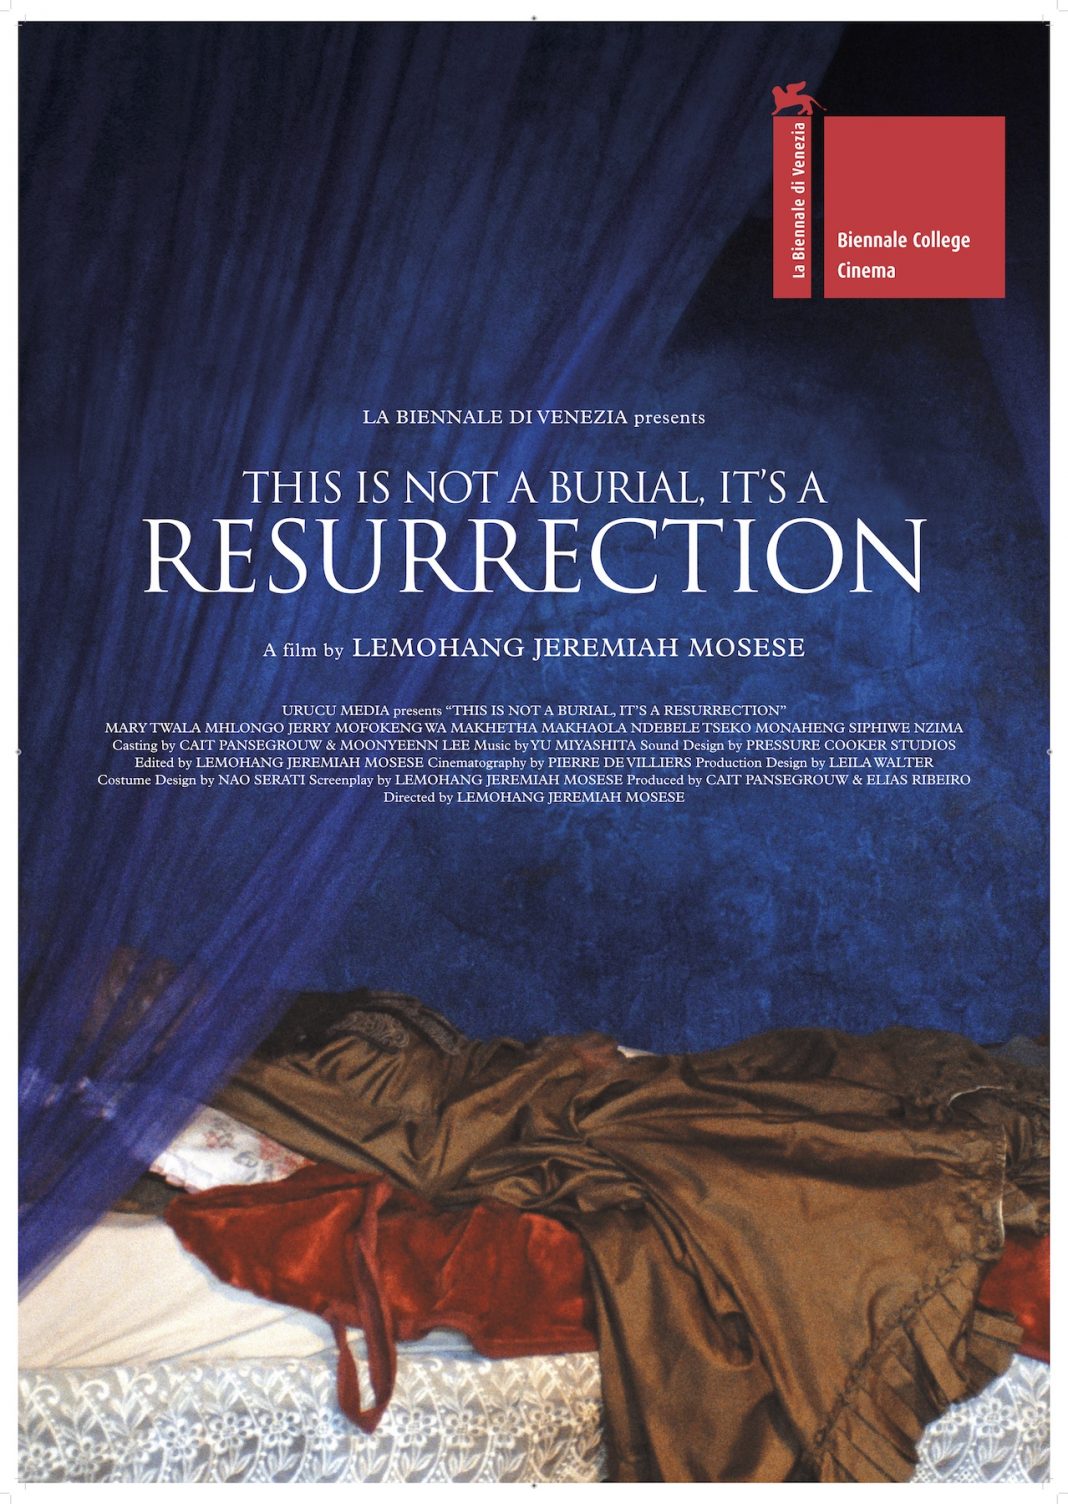 Lemohang Jeremiah Mosese – This Is Not A Burial, It’s A Resurrectionhttps://www.exibart.com/repository/media/formidable/11/BURIAL-poster-TINY-ARTWORK-1068x1504.jpg